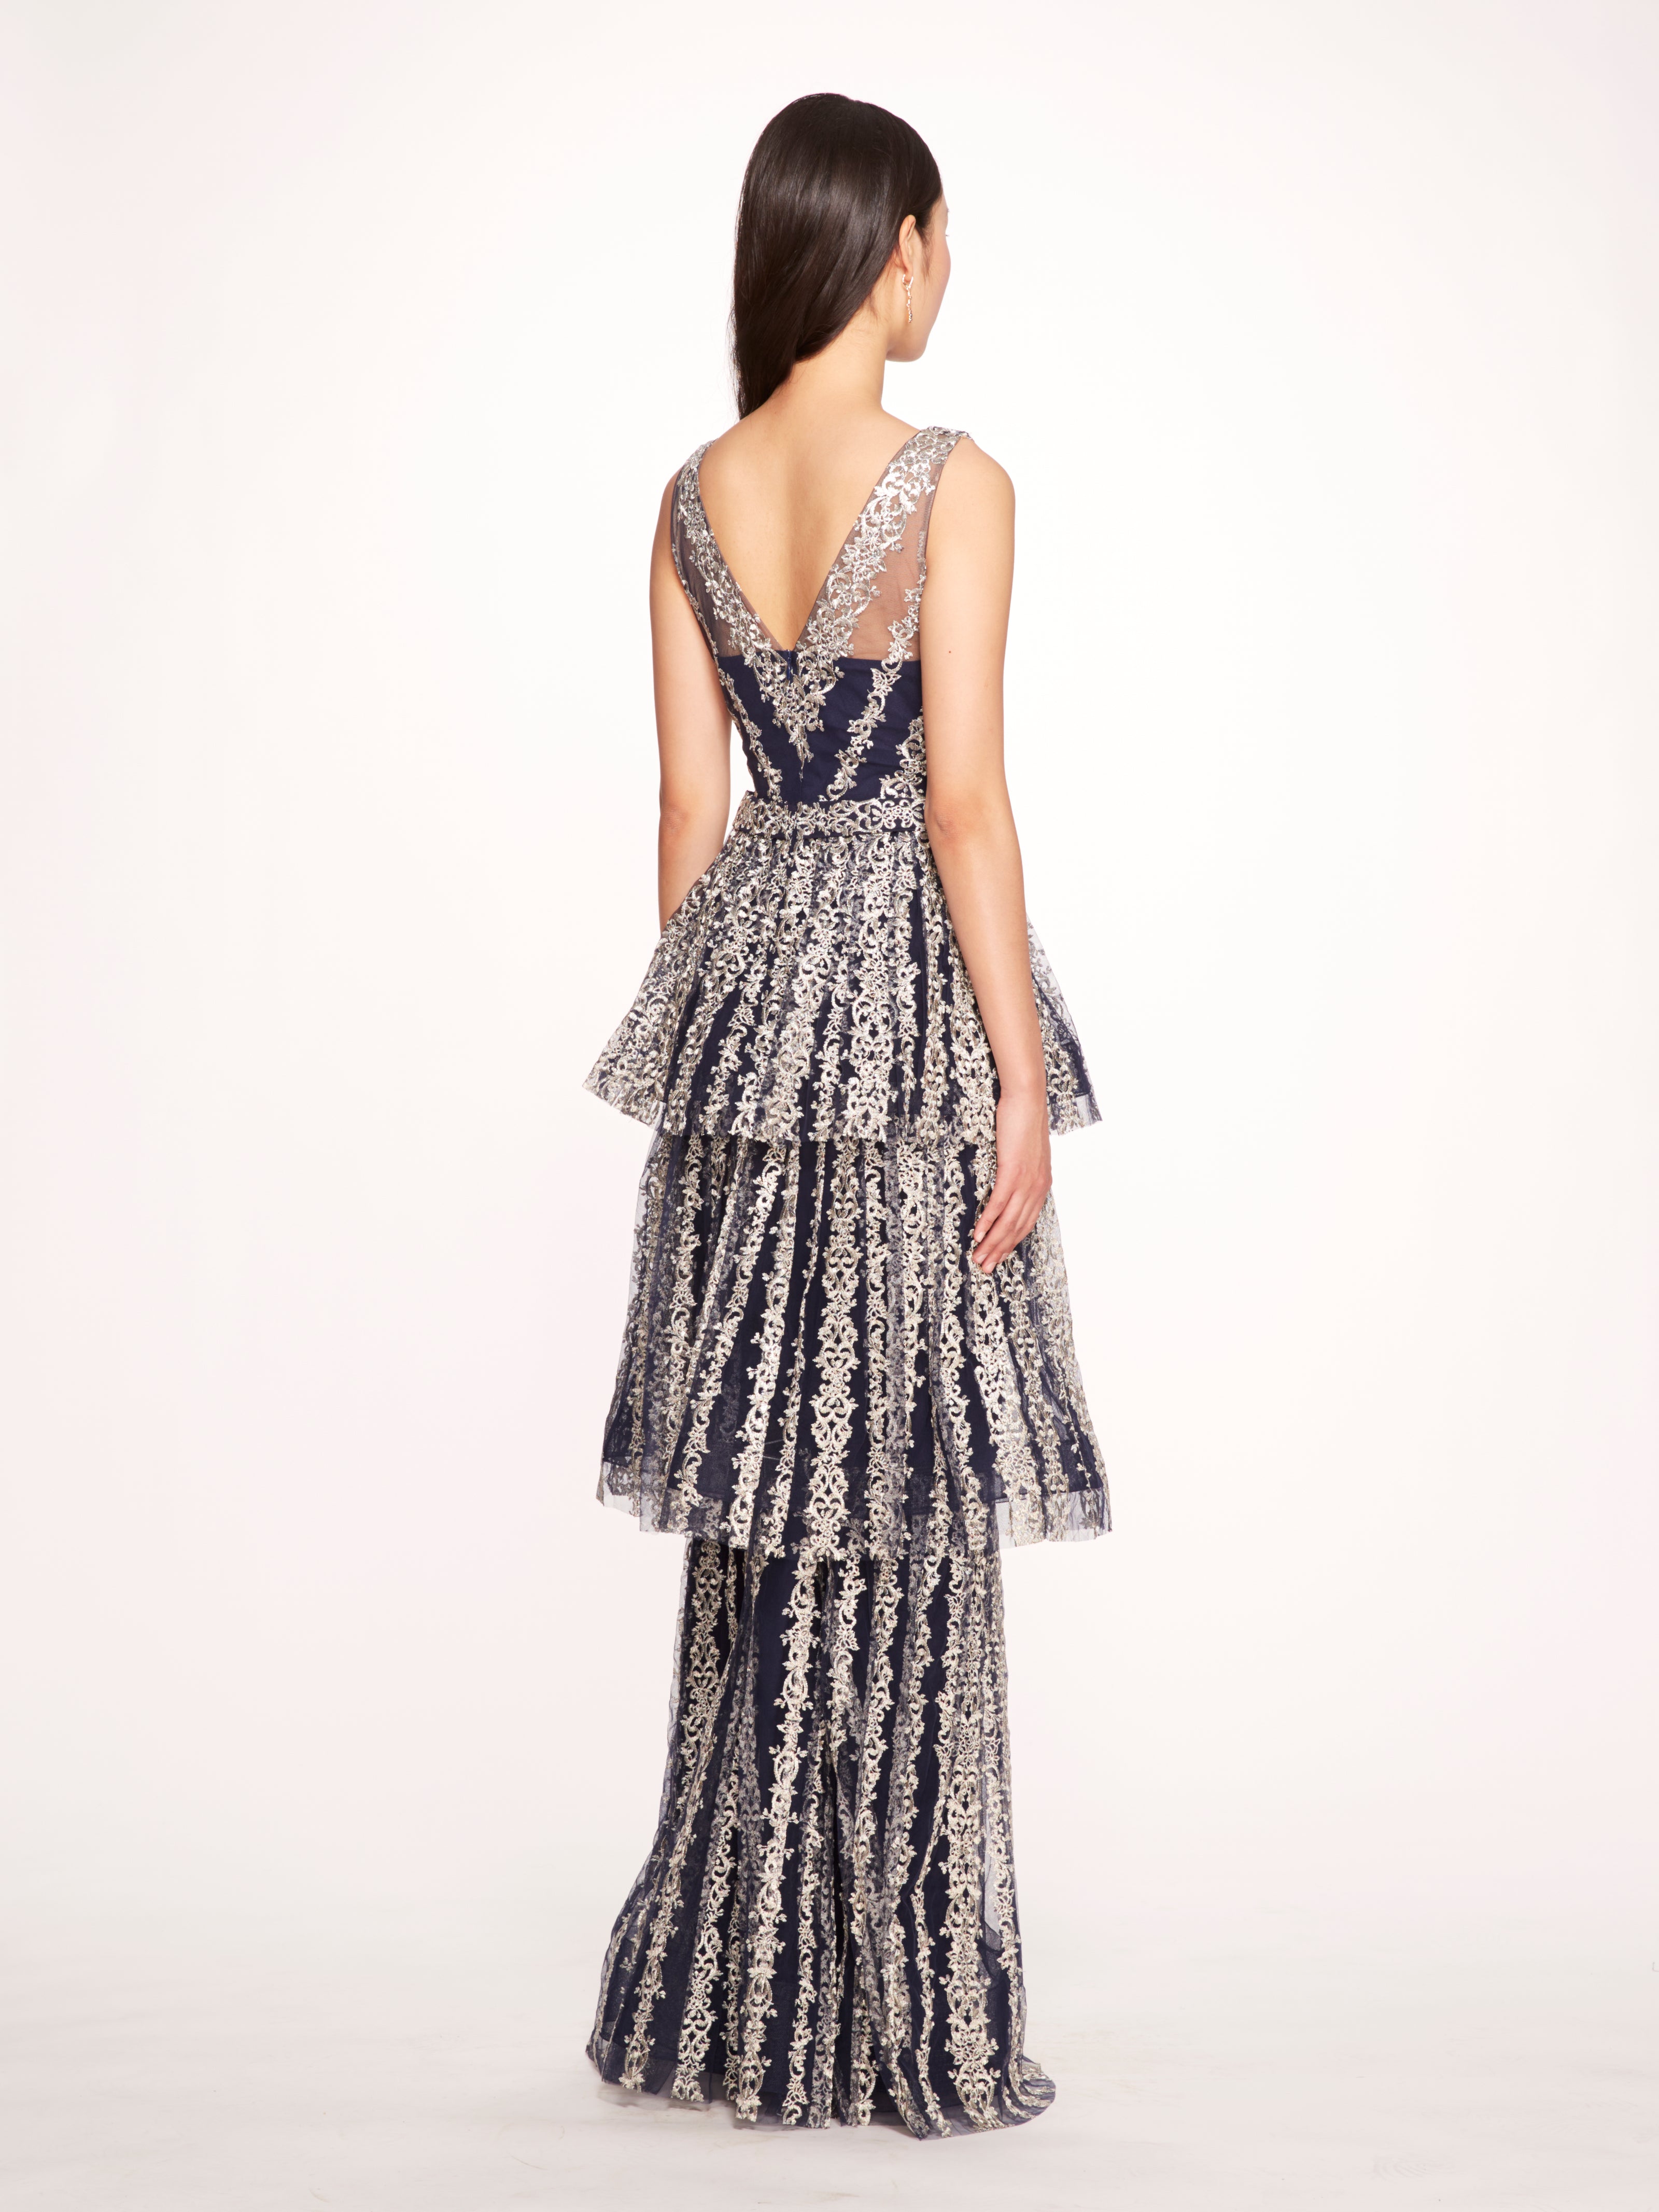 METALLIC FILIGREE EMBROIDERED GOWN